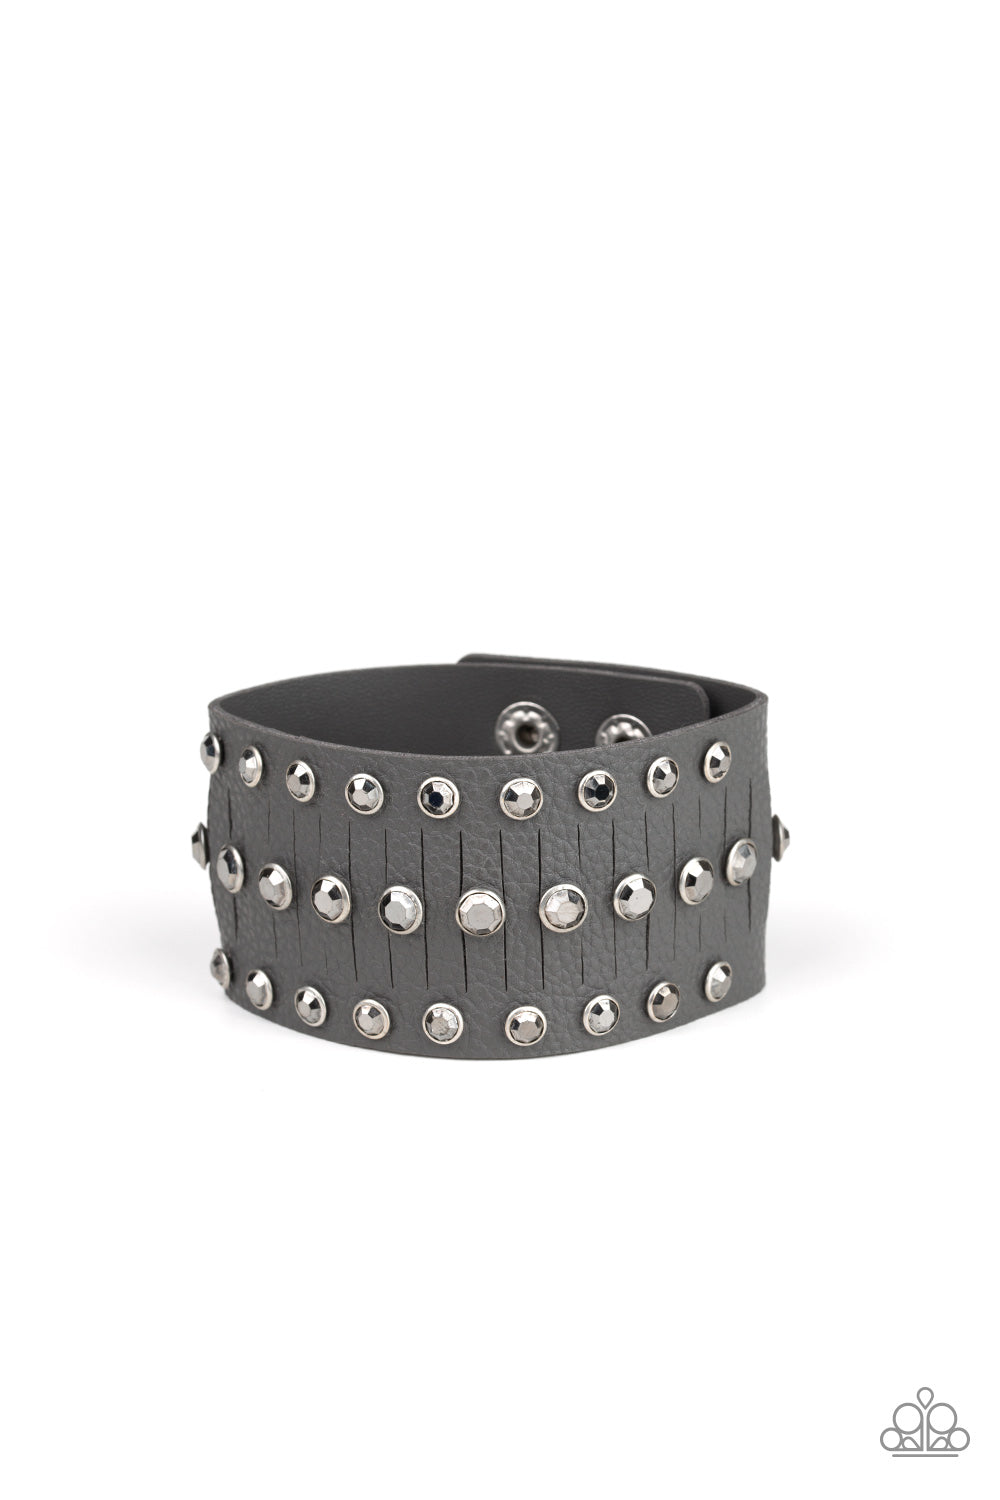 Now Taking The Stage Silver Wrap Bracelet - Paparazzi Accessories  Pressed into sleek silver frames, glittery hematite rhinestones are studded across a thick gray leather band featuring a center lined with slits for a sassy finish. Features an adjustable snap closure.  ﻿All Paparazzi Accessories are lead free and nickel free!  Sold as one individual bracelet.